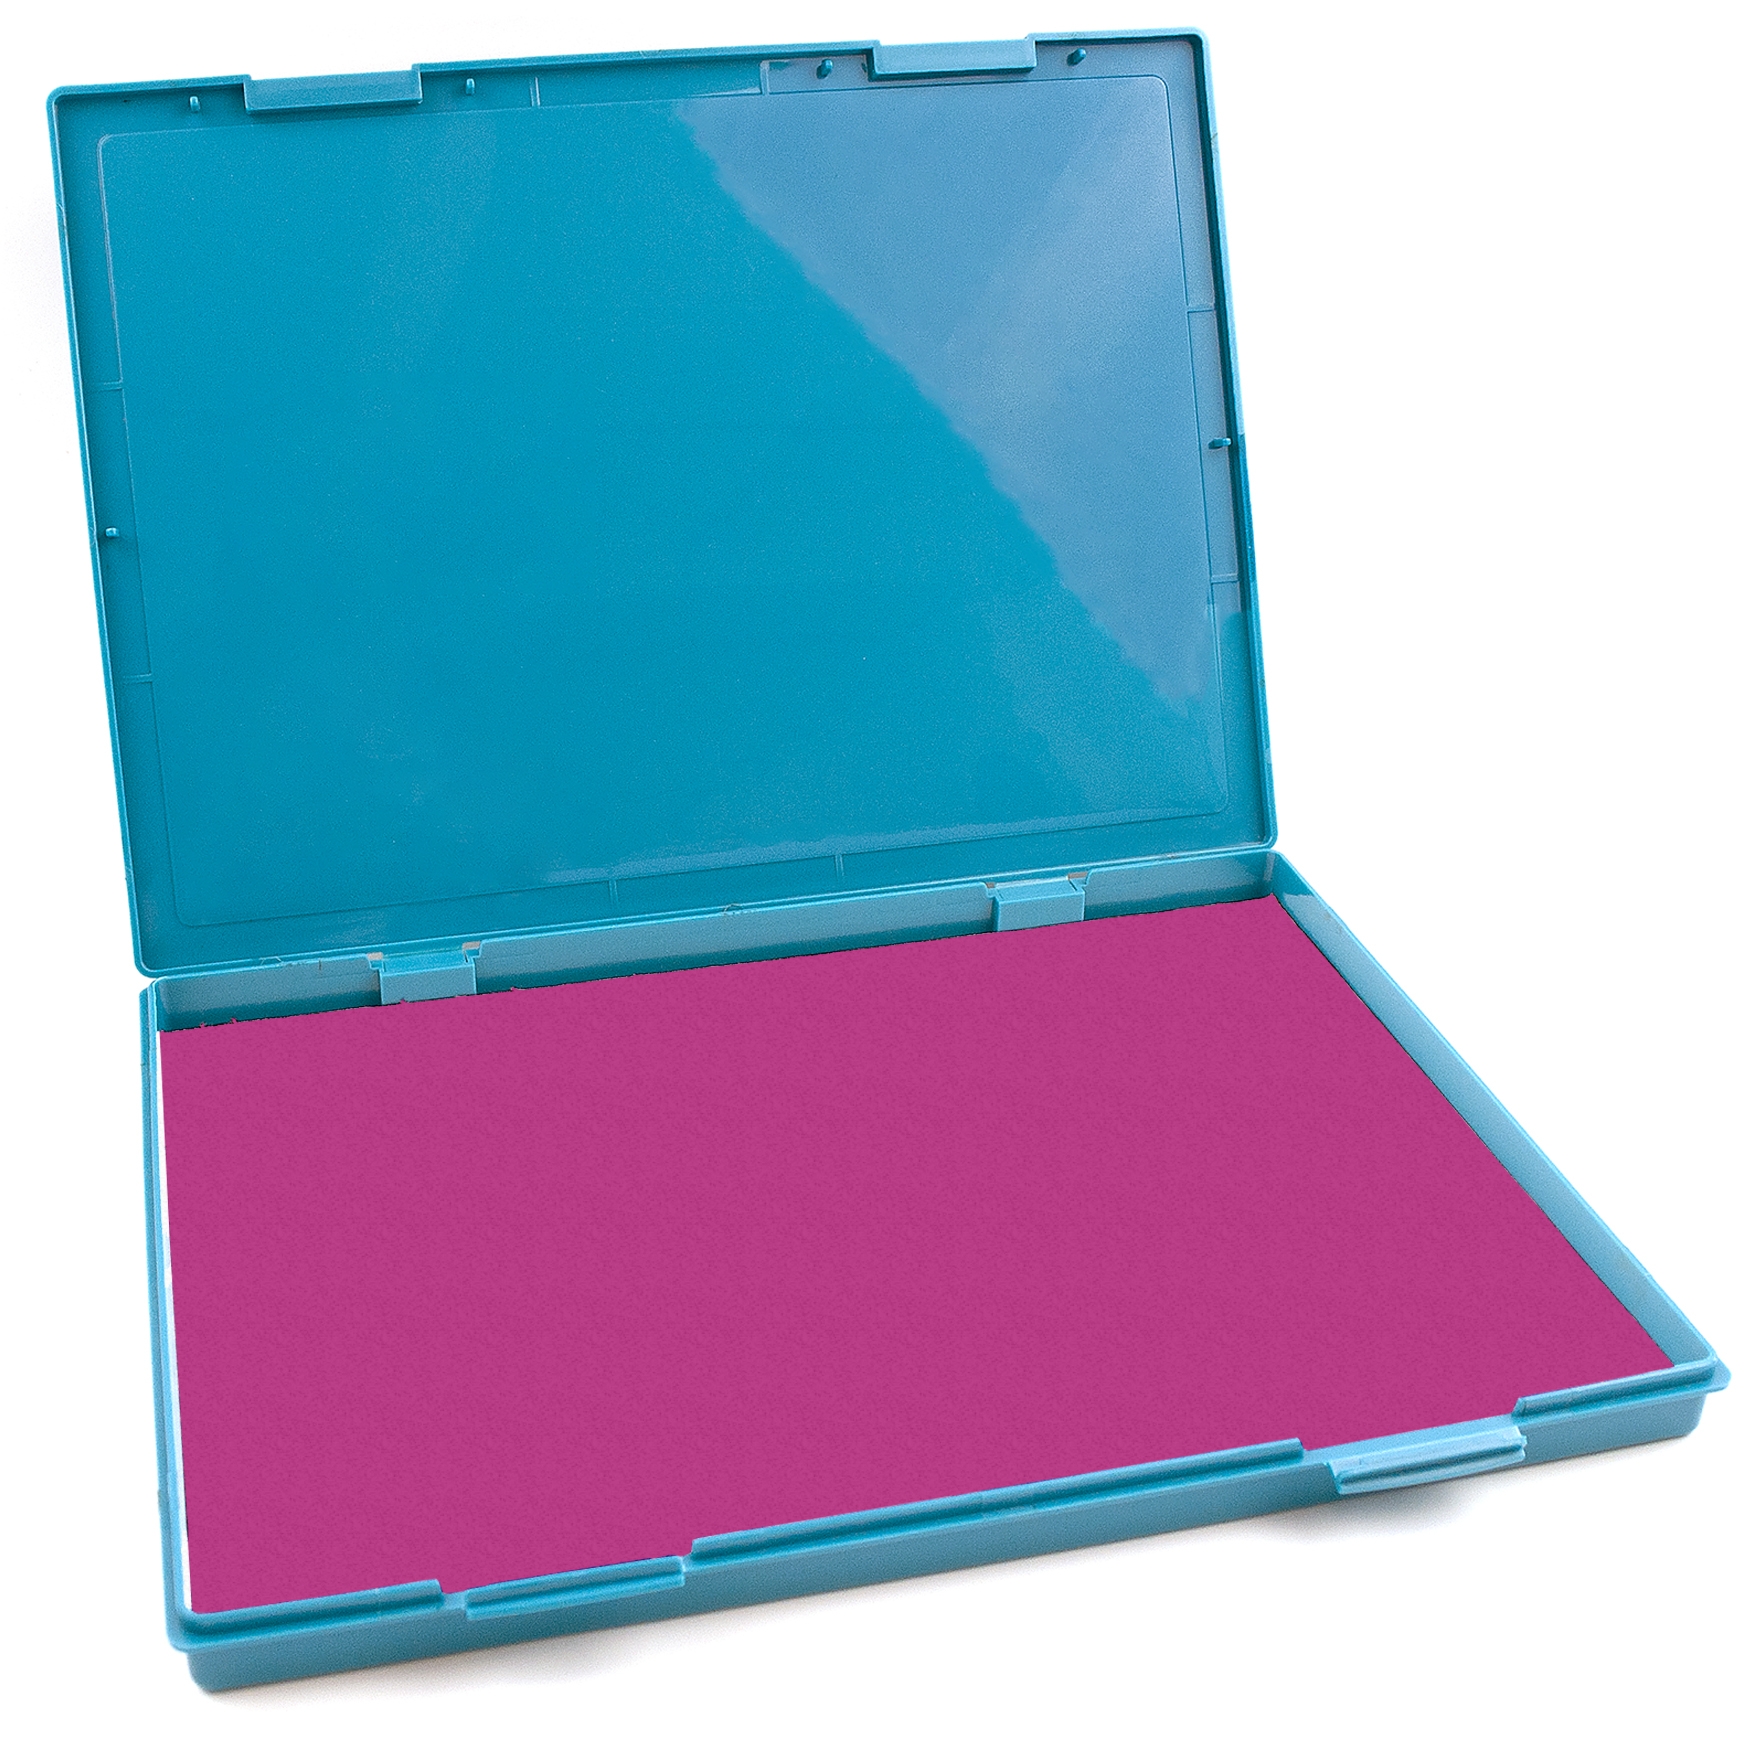 Extra Large Pink Ink Stamp Pad - 8.25" x 11.5" - Industrial Felt Pad